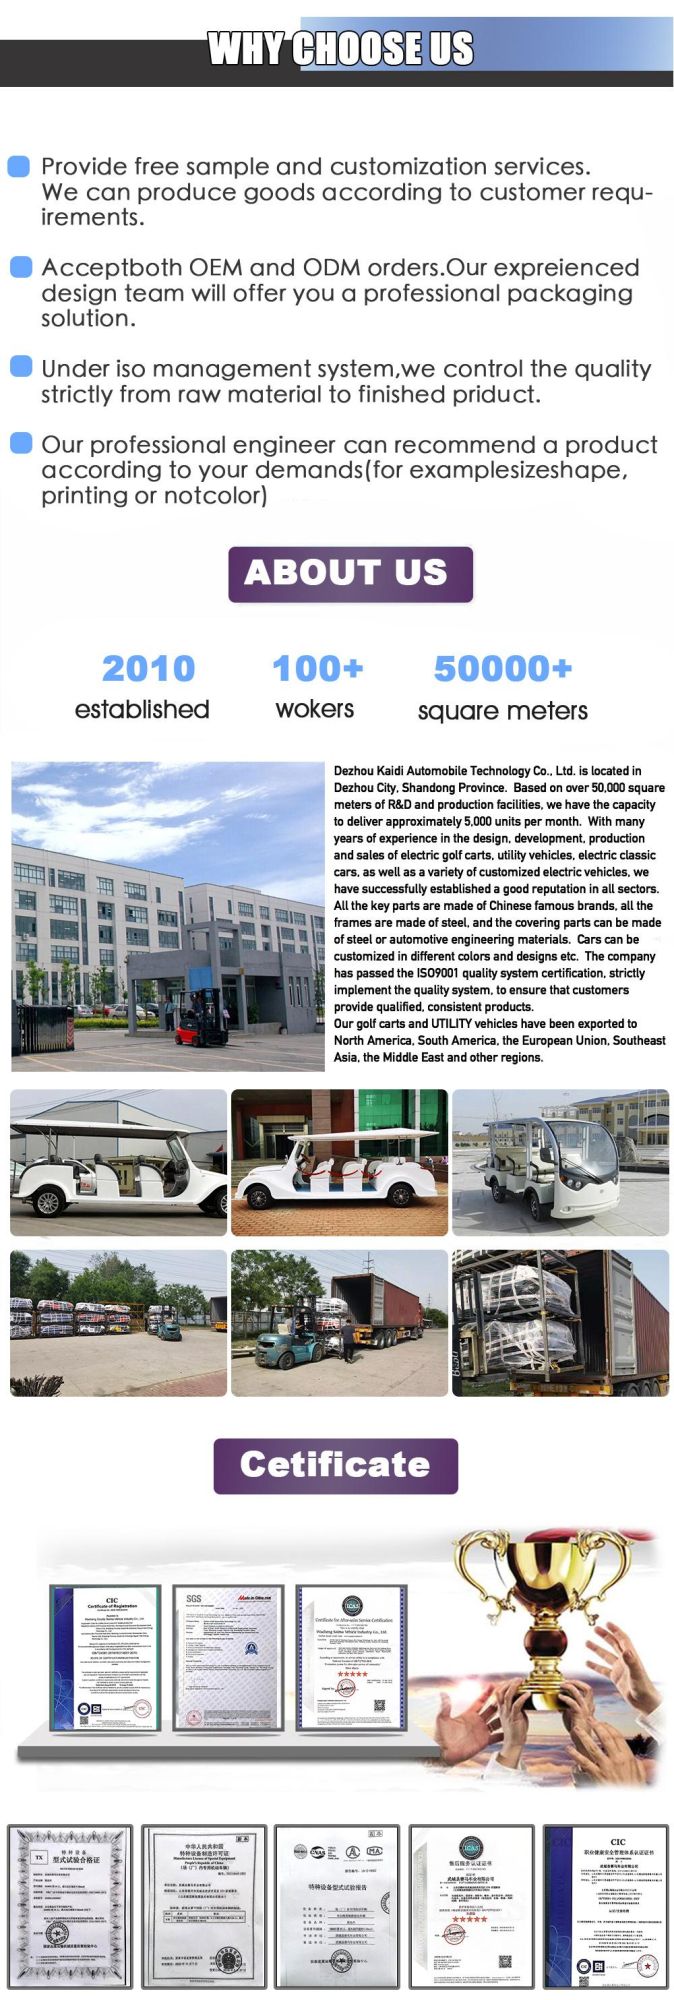 Tour Sightseeing Vehicles 11 Seater Closed Sightseeing Vehicles Car Electric Sightseeing Vehicles for Sale